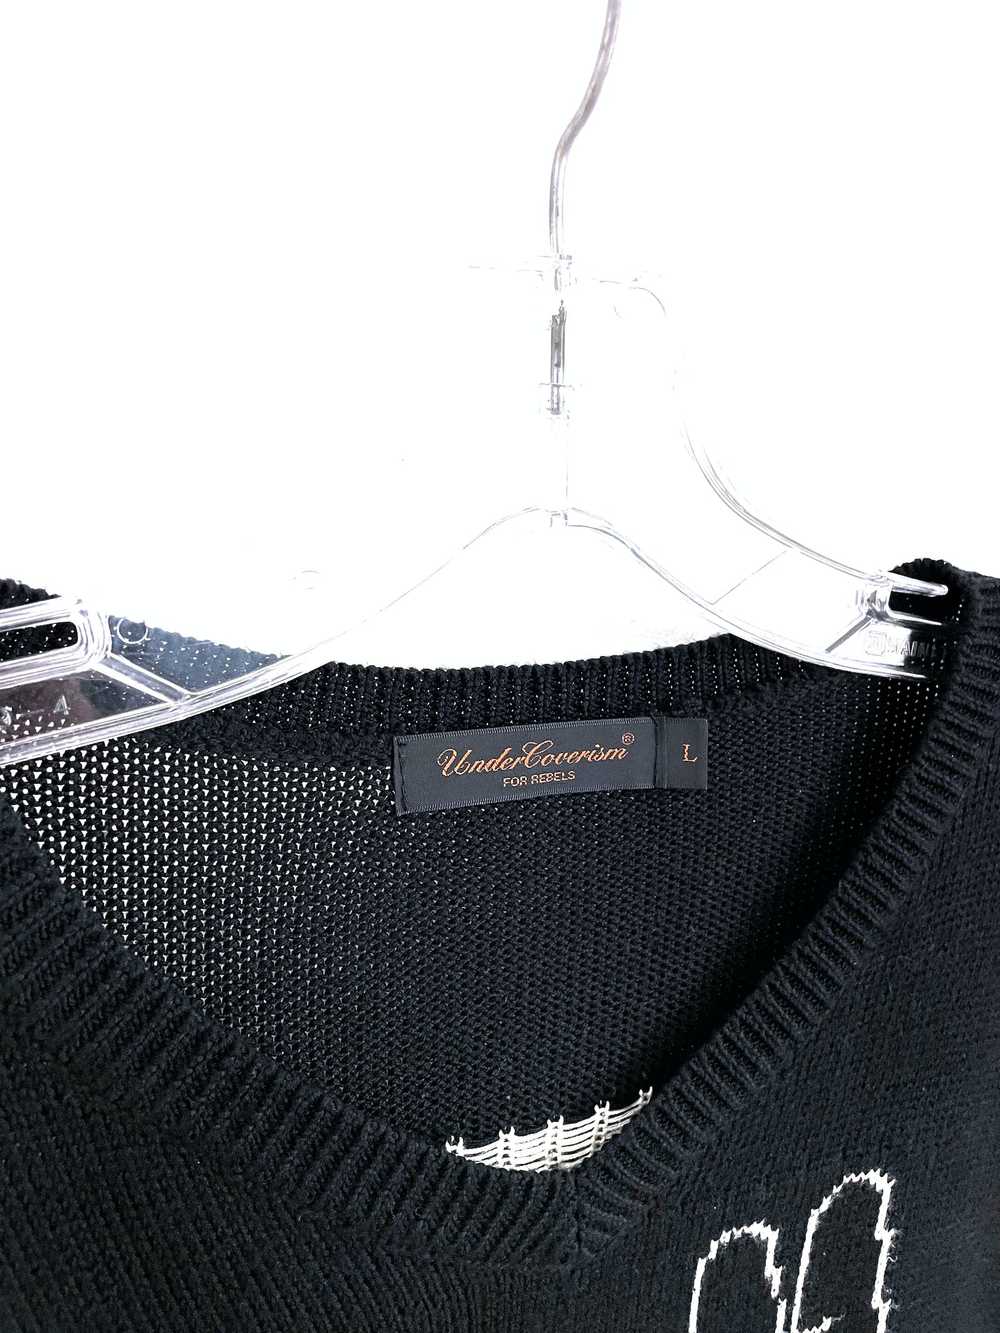 Undercover SS04 Languid Silk Sweater - image 3